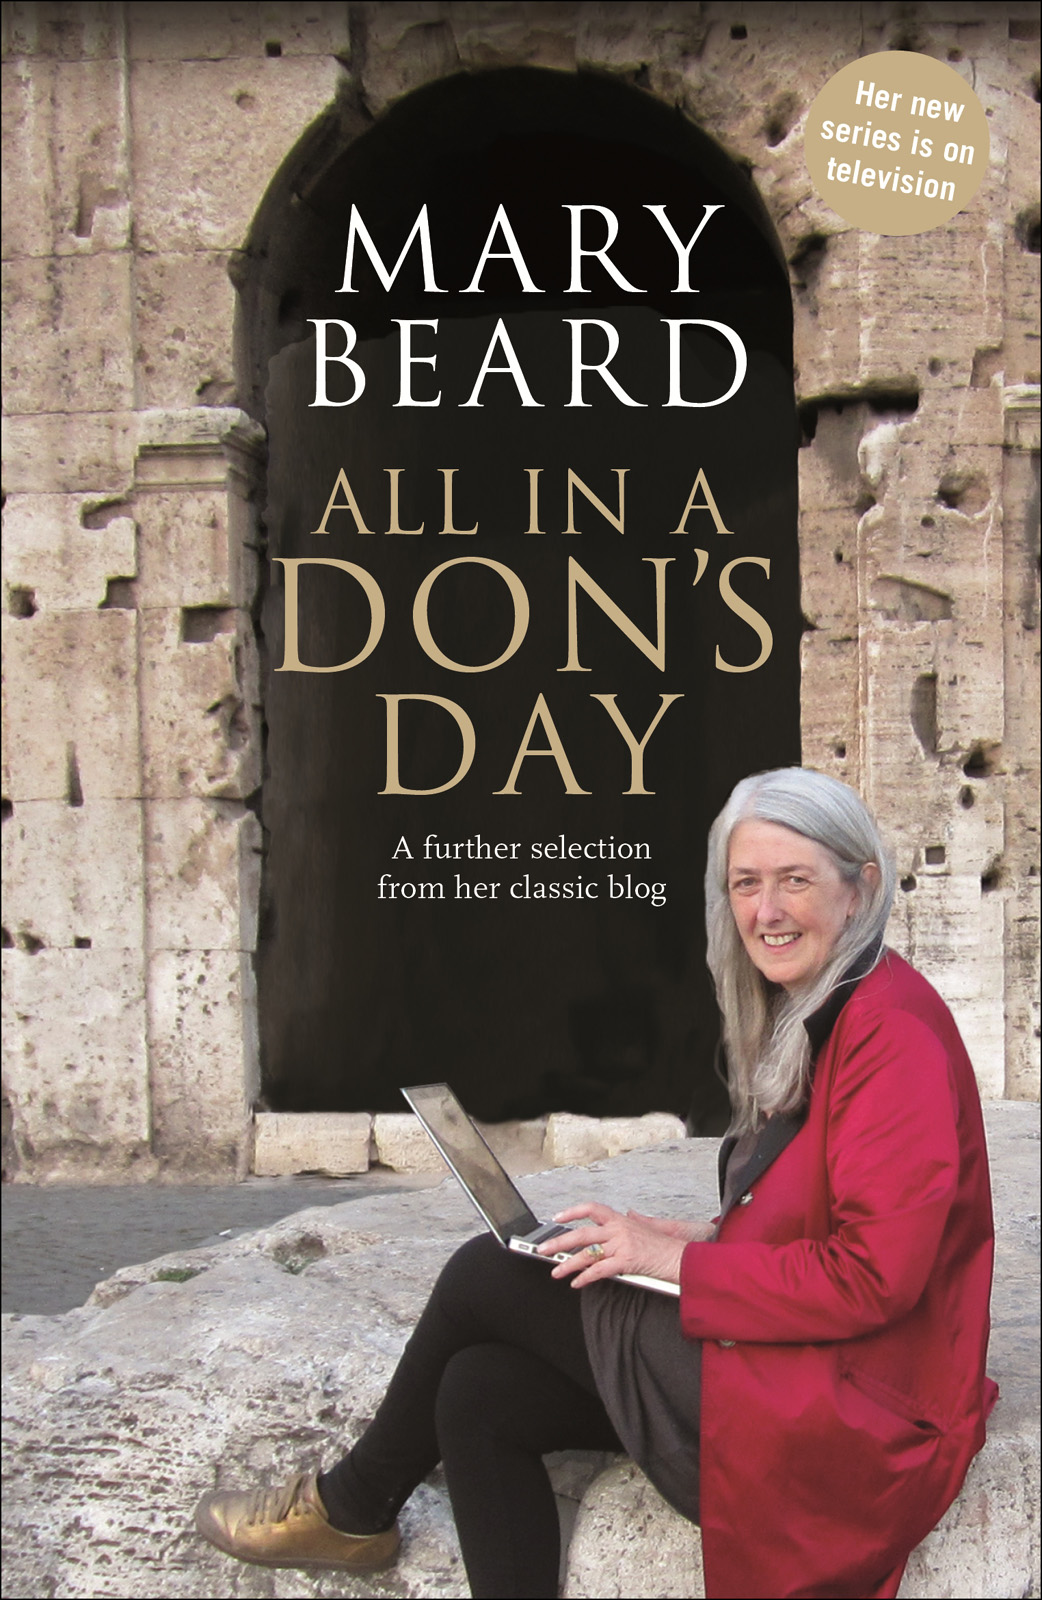 All in a Don's Day (2012) by Mary Beard